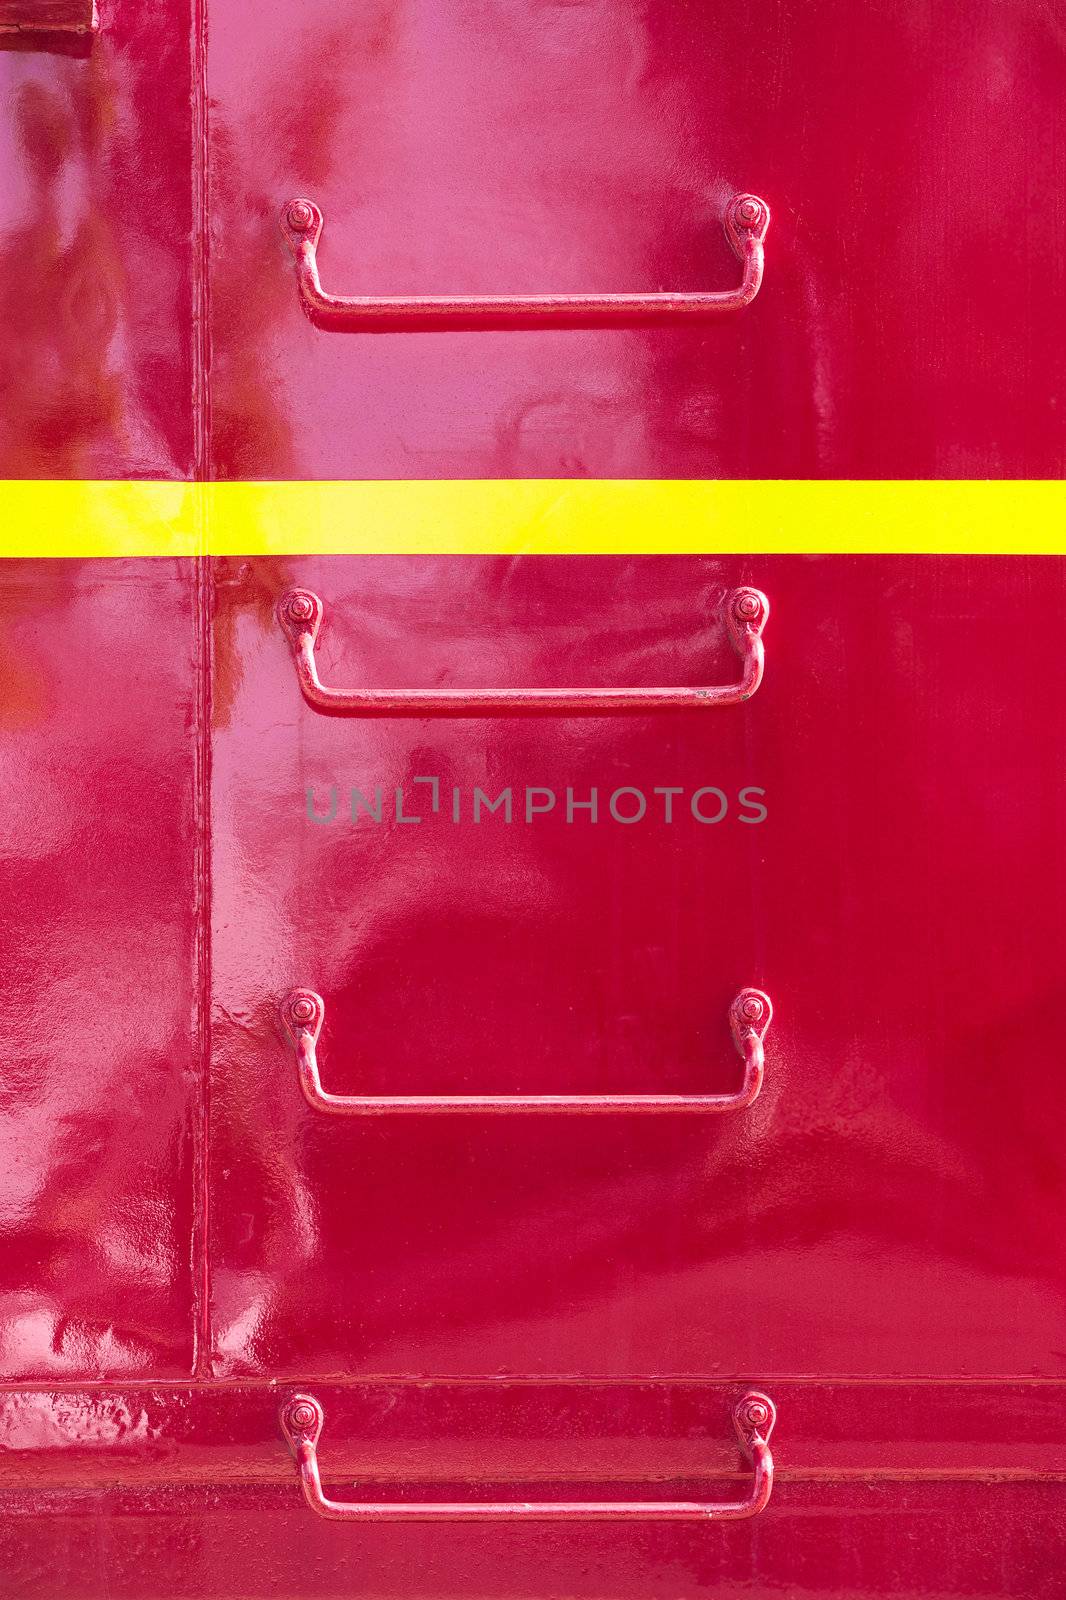 Metal ladder on Side of Train Caboose by Creatista